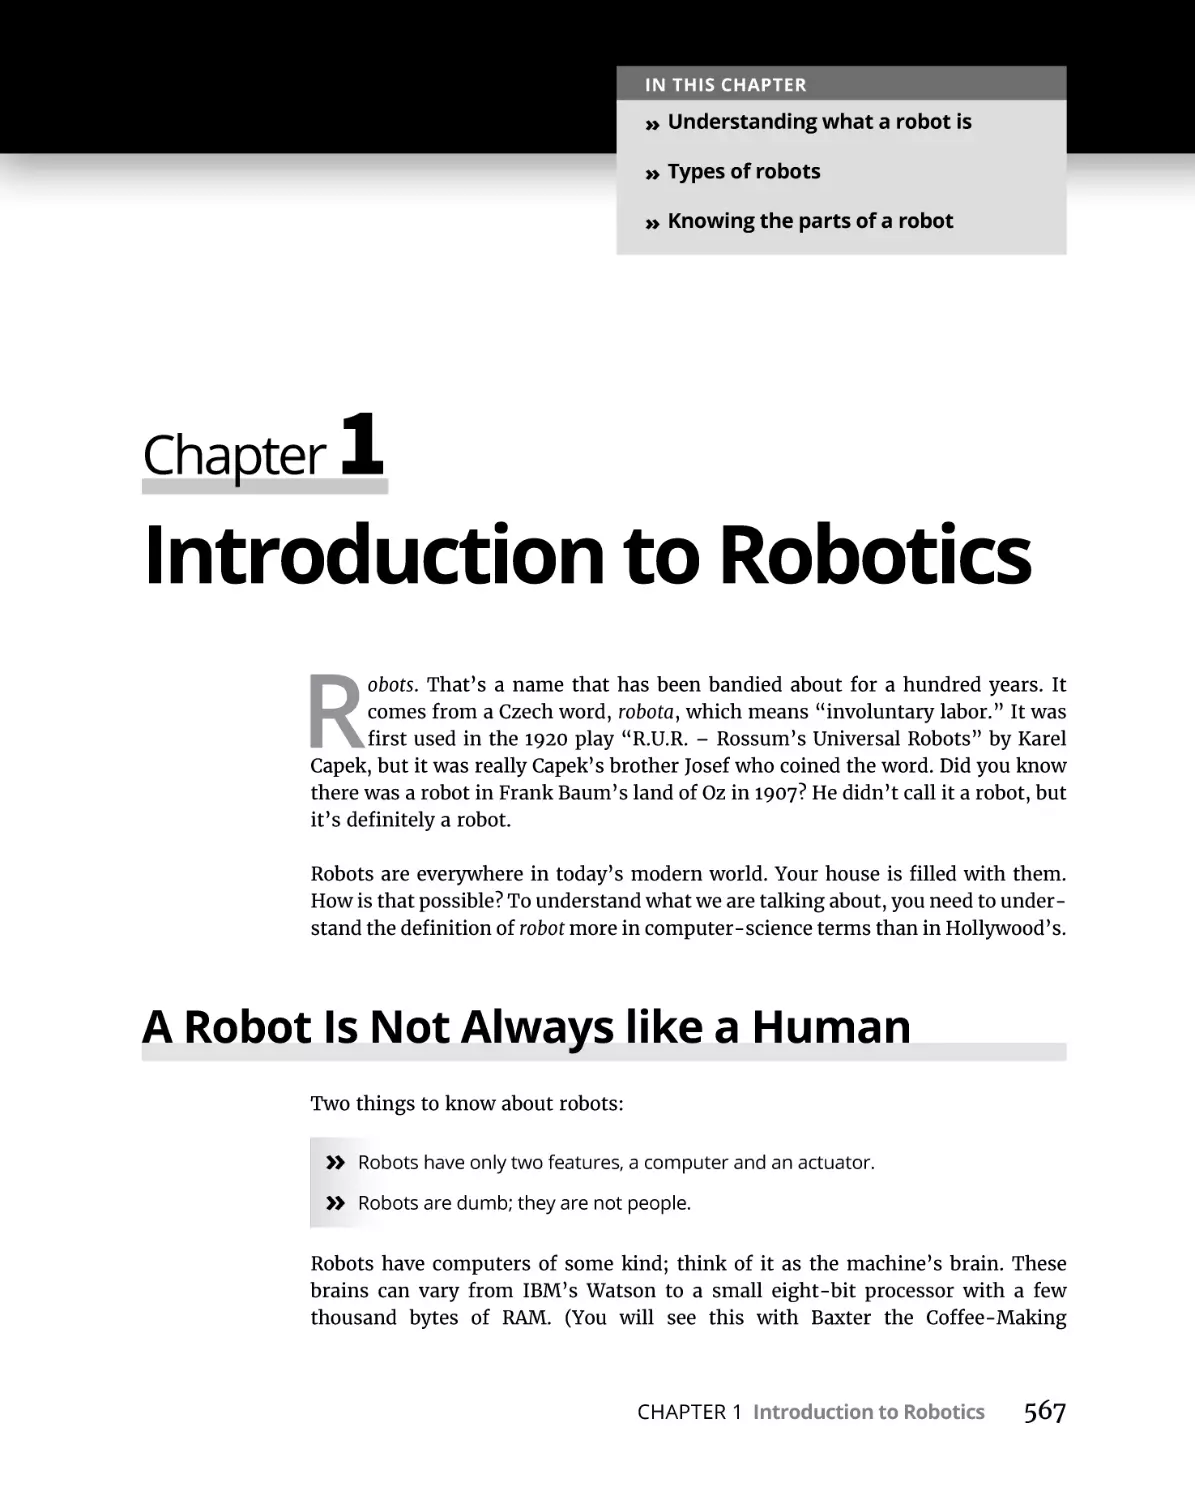 Chapter 1 Introduction to Robotics
A Robot Is Not Always like a Human